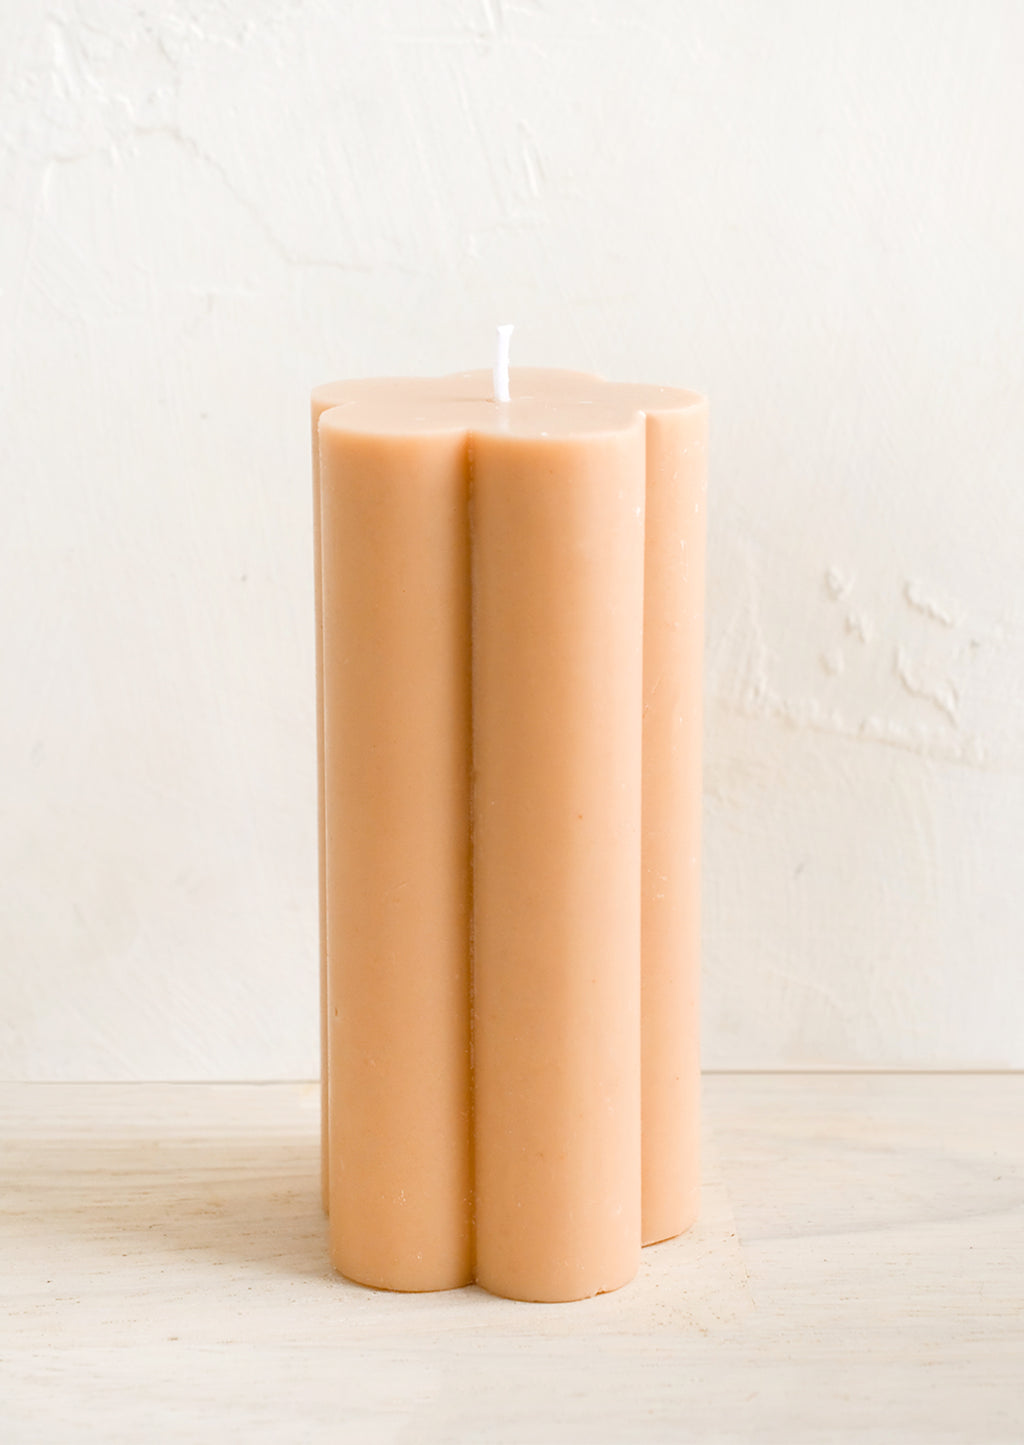 Nude: A flower shaped pillar candle in nude peach color.